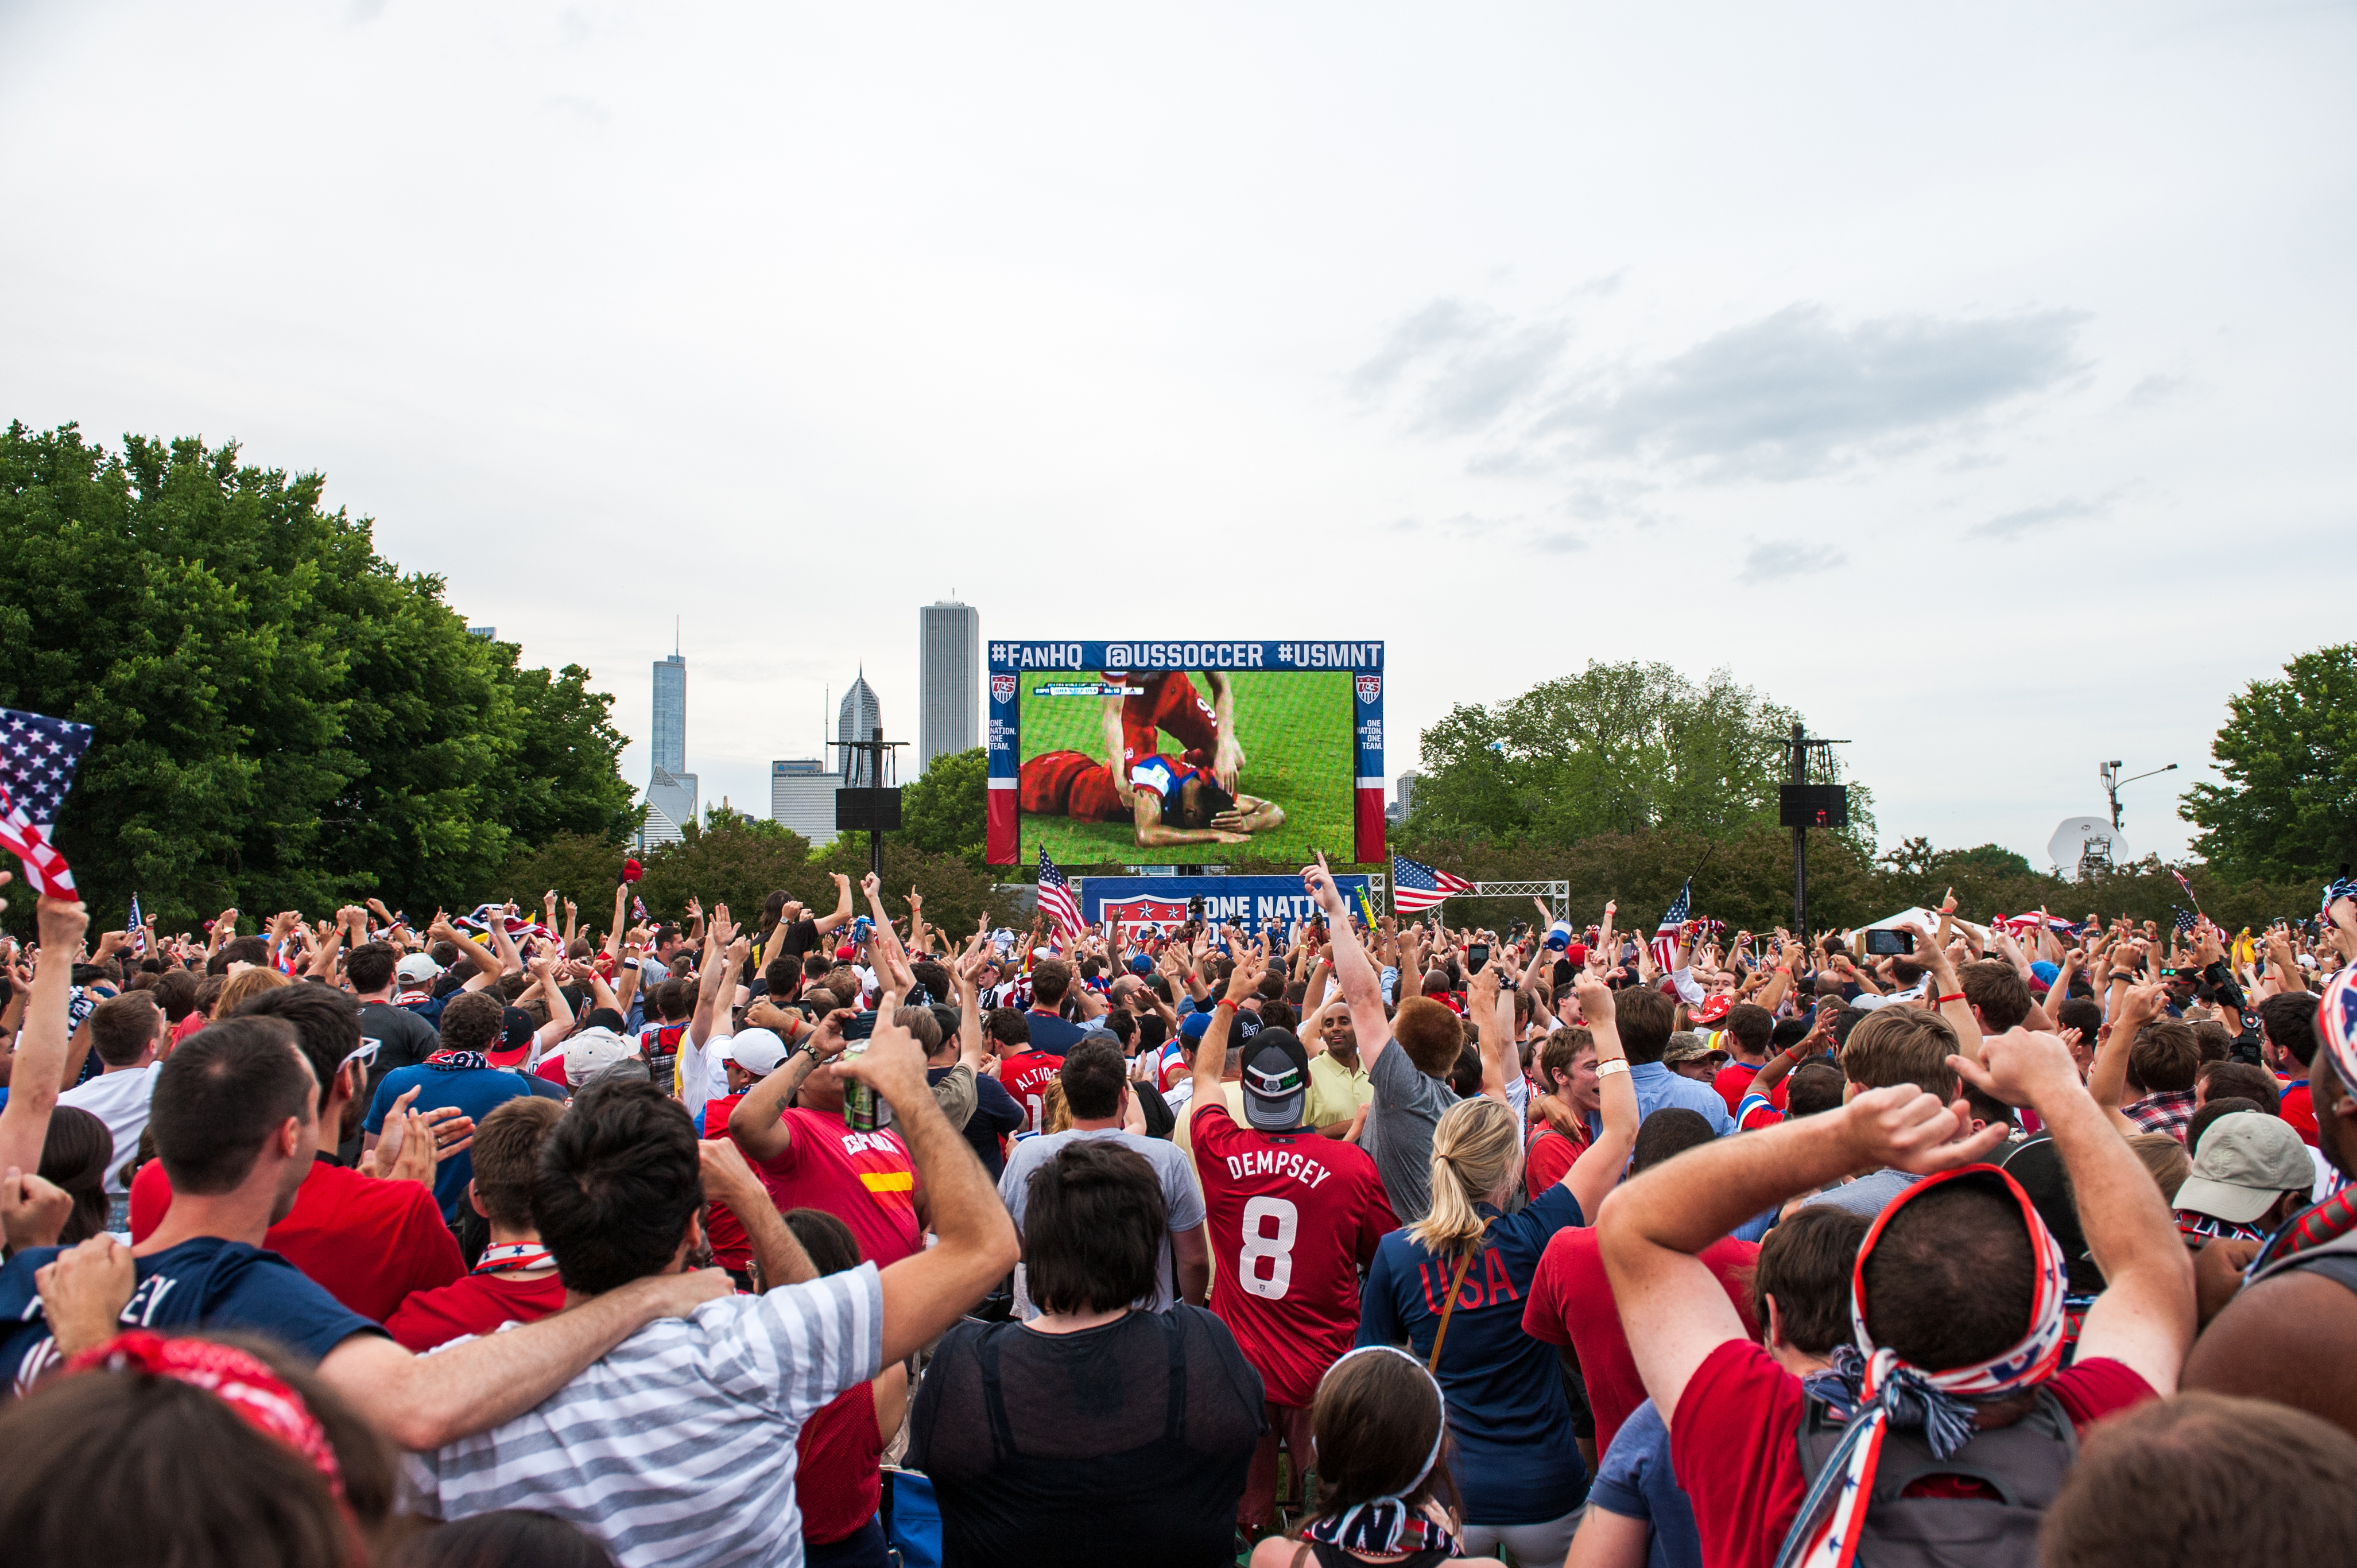 Watch USA-Germany World Cup Match Free at Viewing Parties in 12 U.S